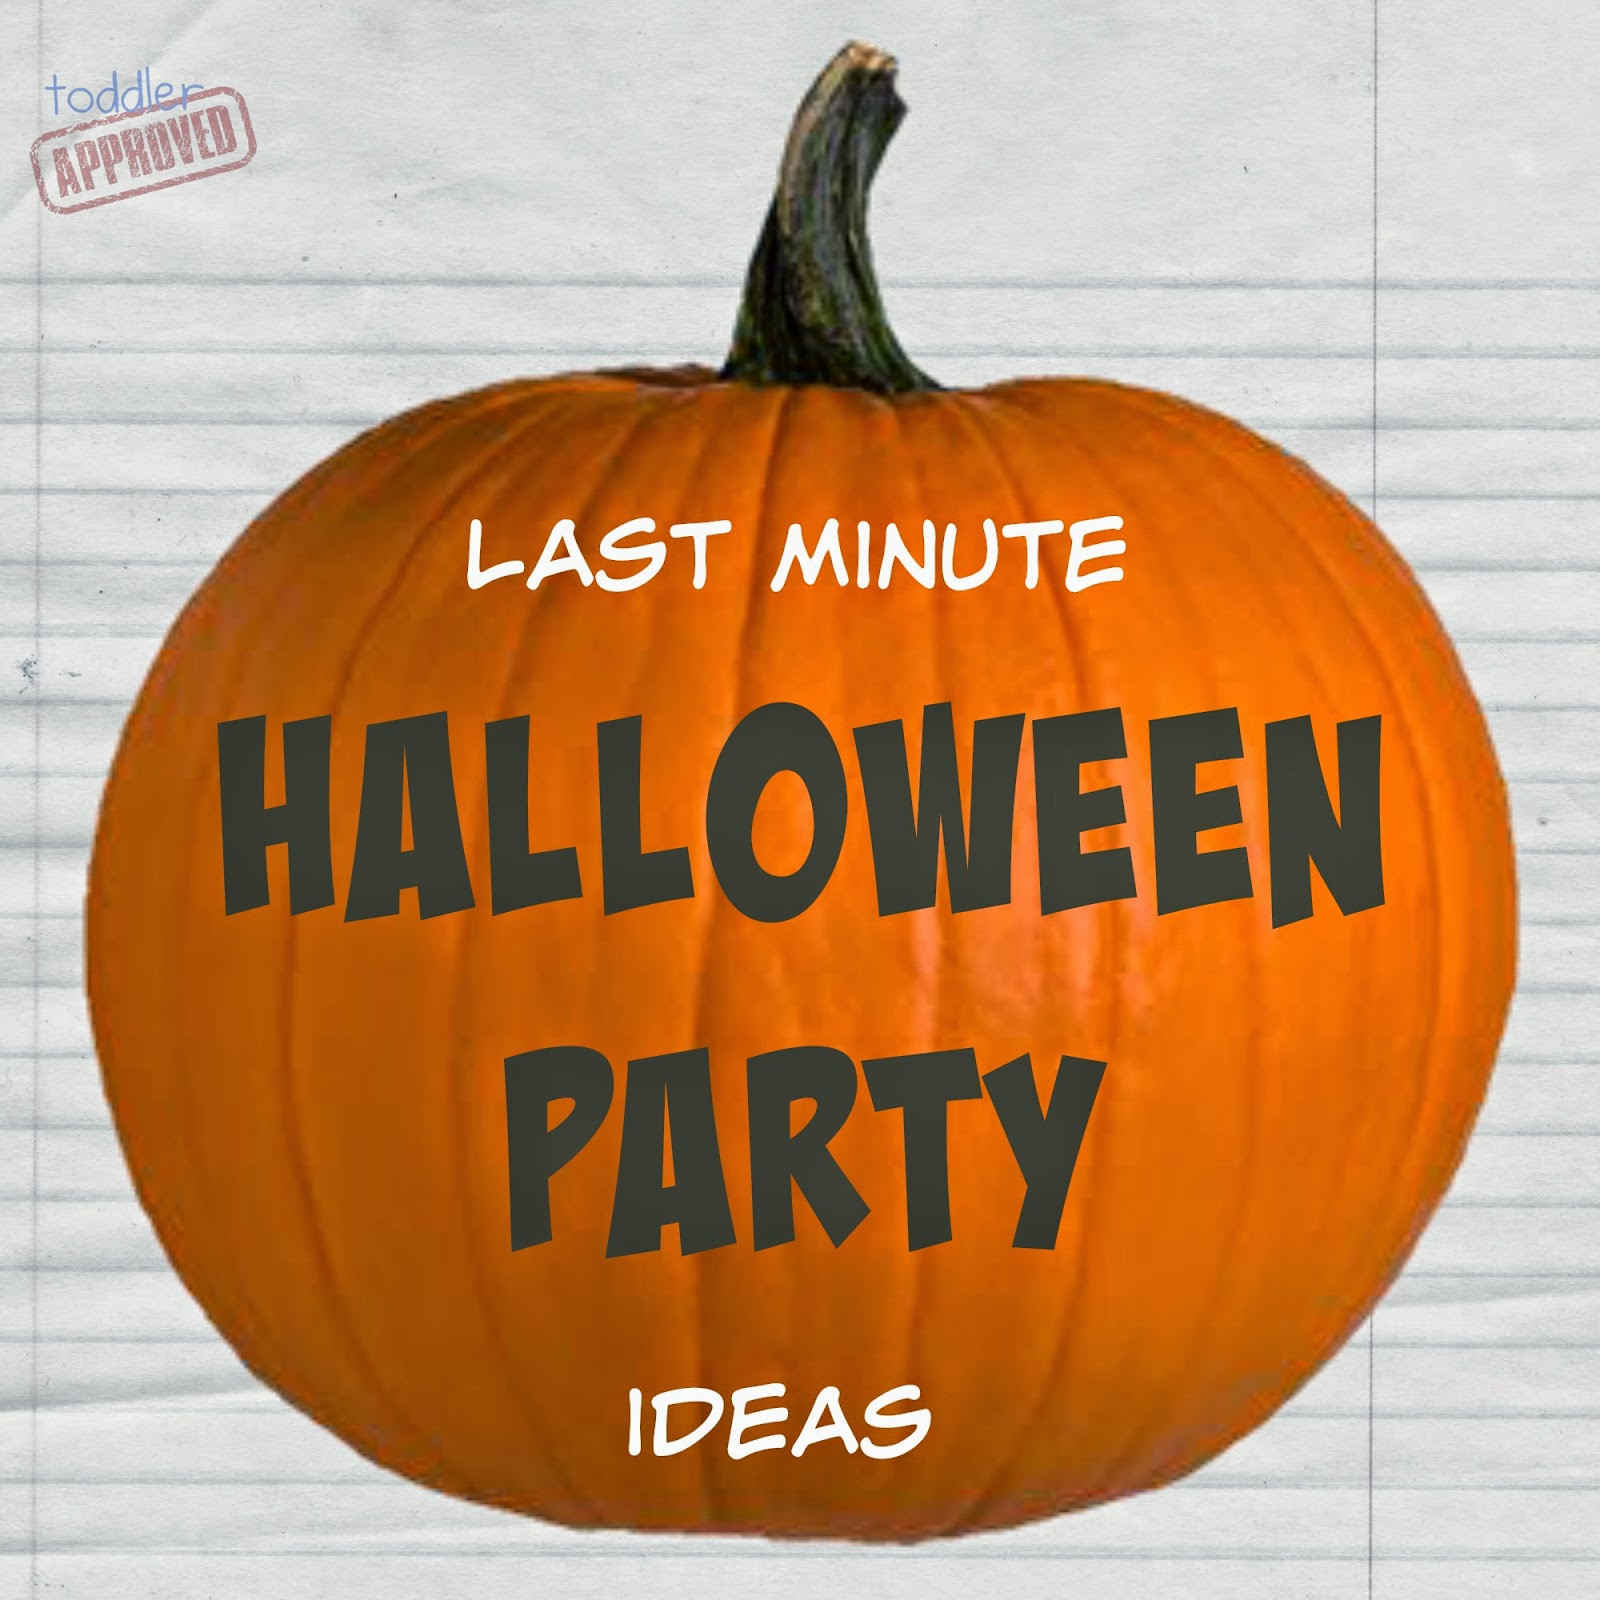 Last Minute Halloween Party Ideas
 Toddler Approved Last Minute Halloween Party Ideas